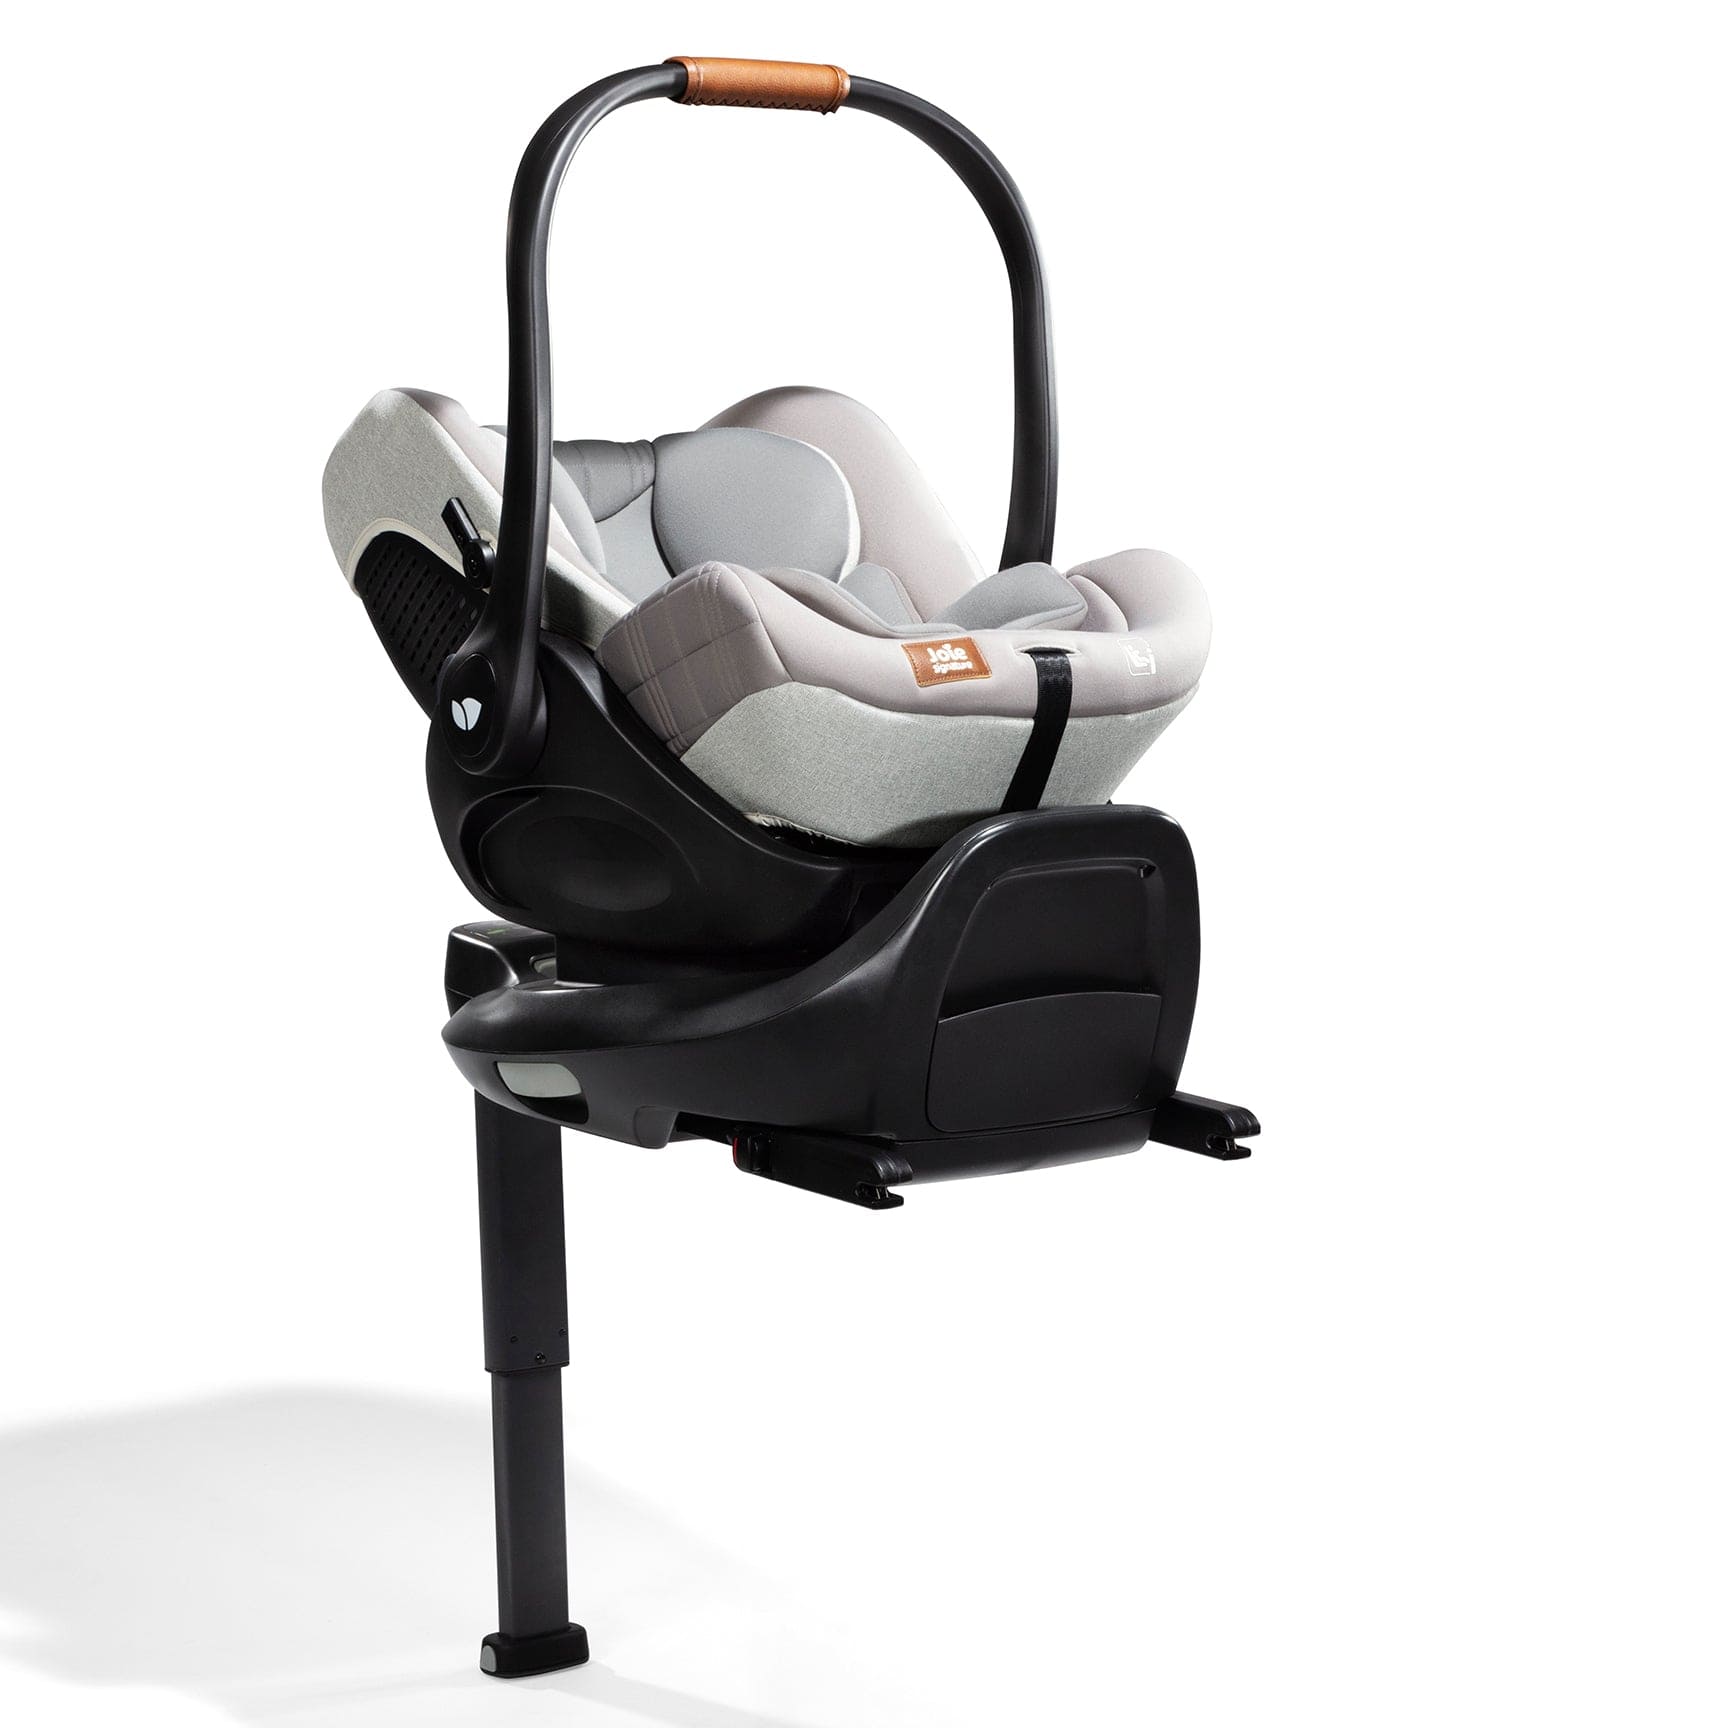 Joie i-Level Recline Signature Car Seat & i-Base Encore in Oyster Baby Car Seats 12224-OYS